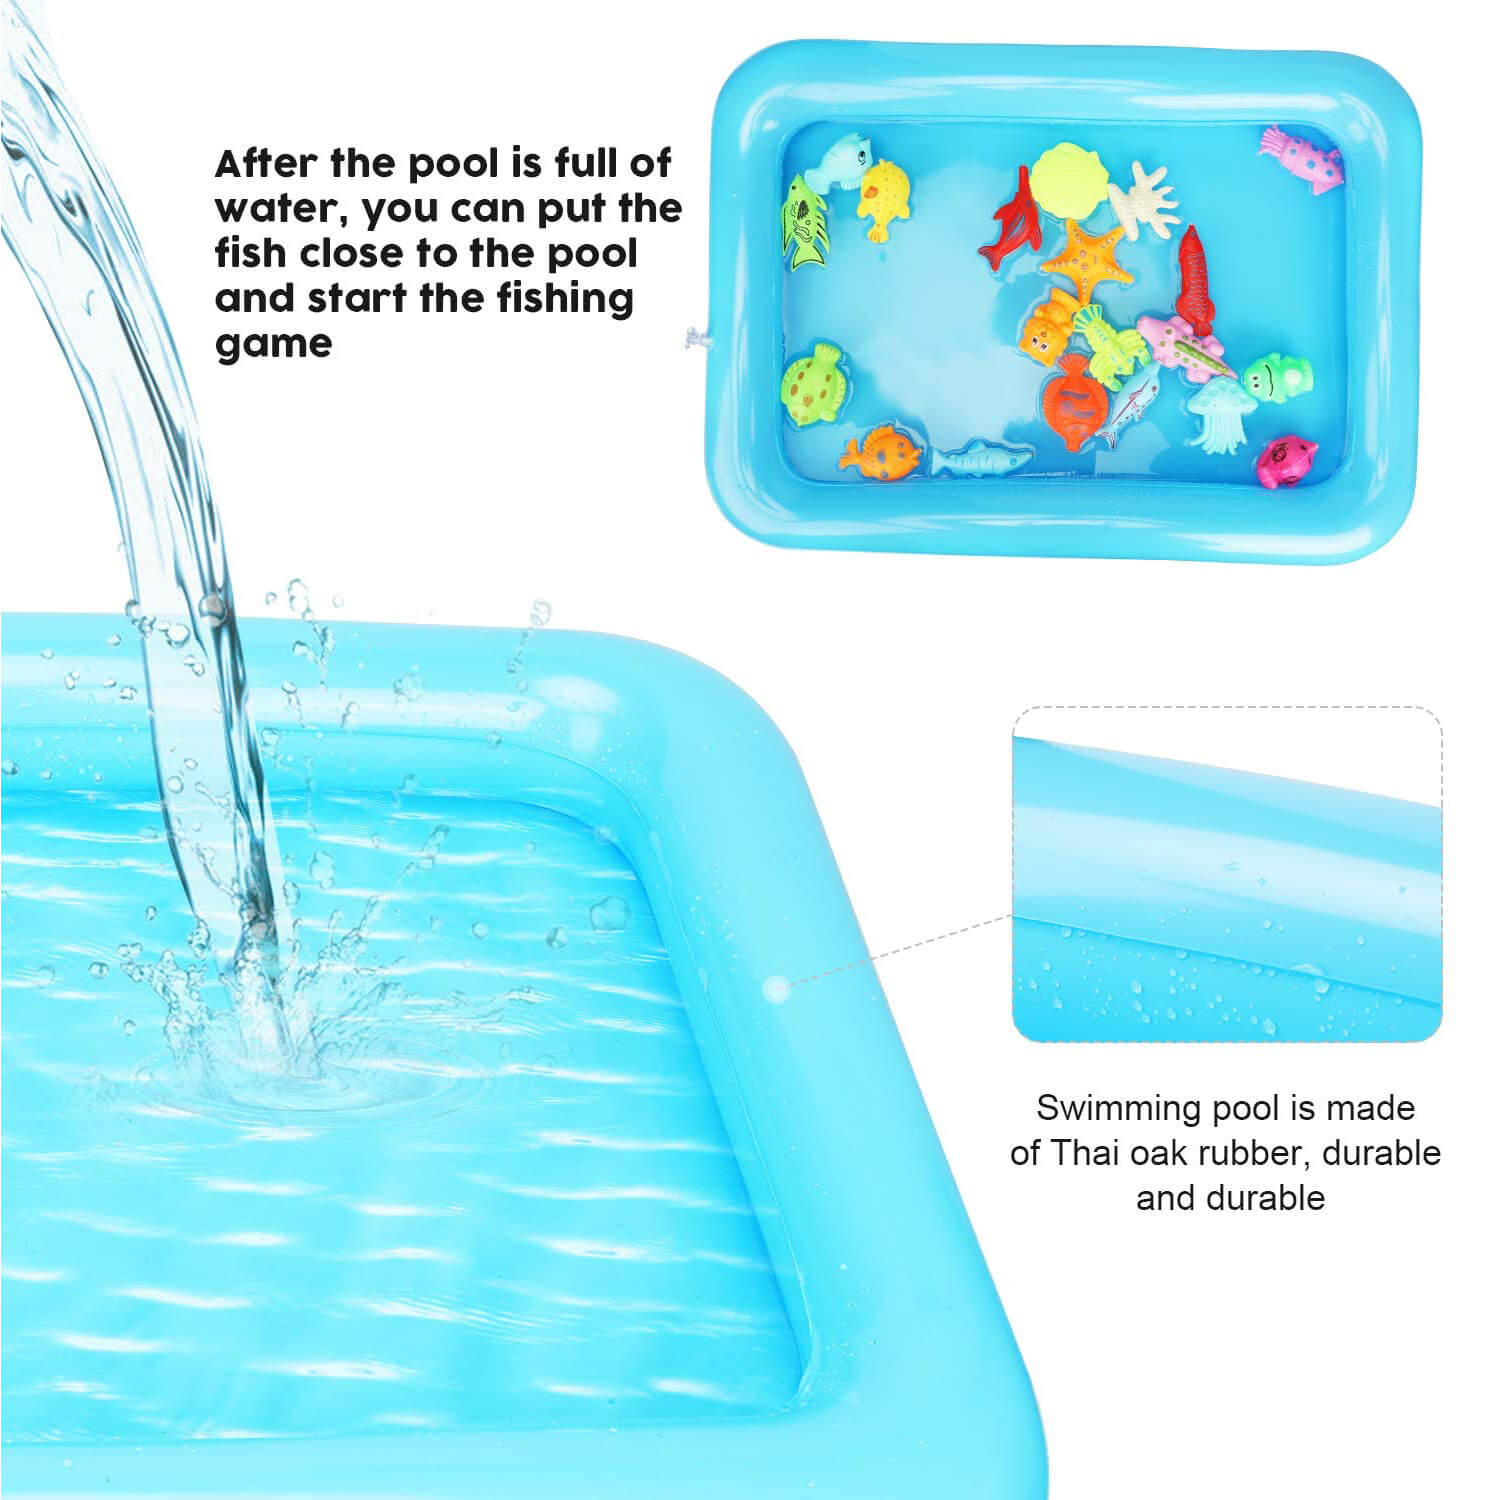 Inflatable Fish Fishing Child  Magnetic Fishing Toy Kids